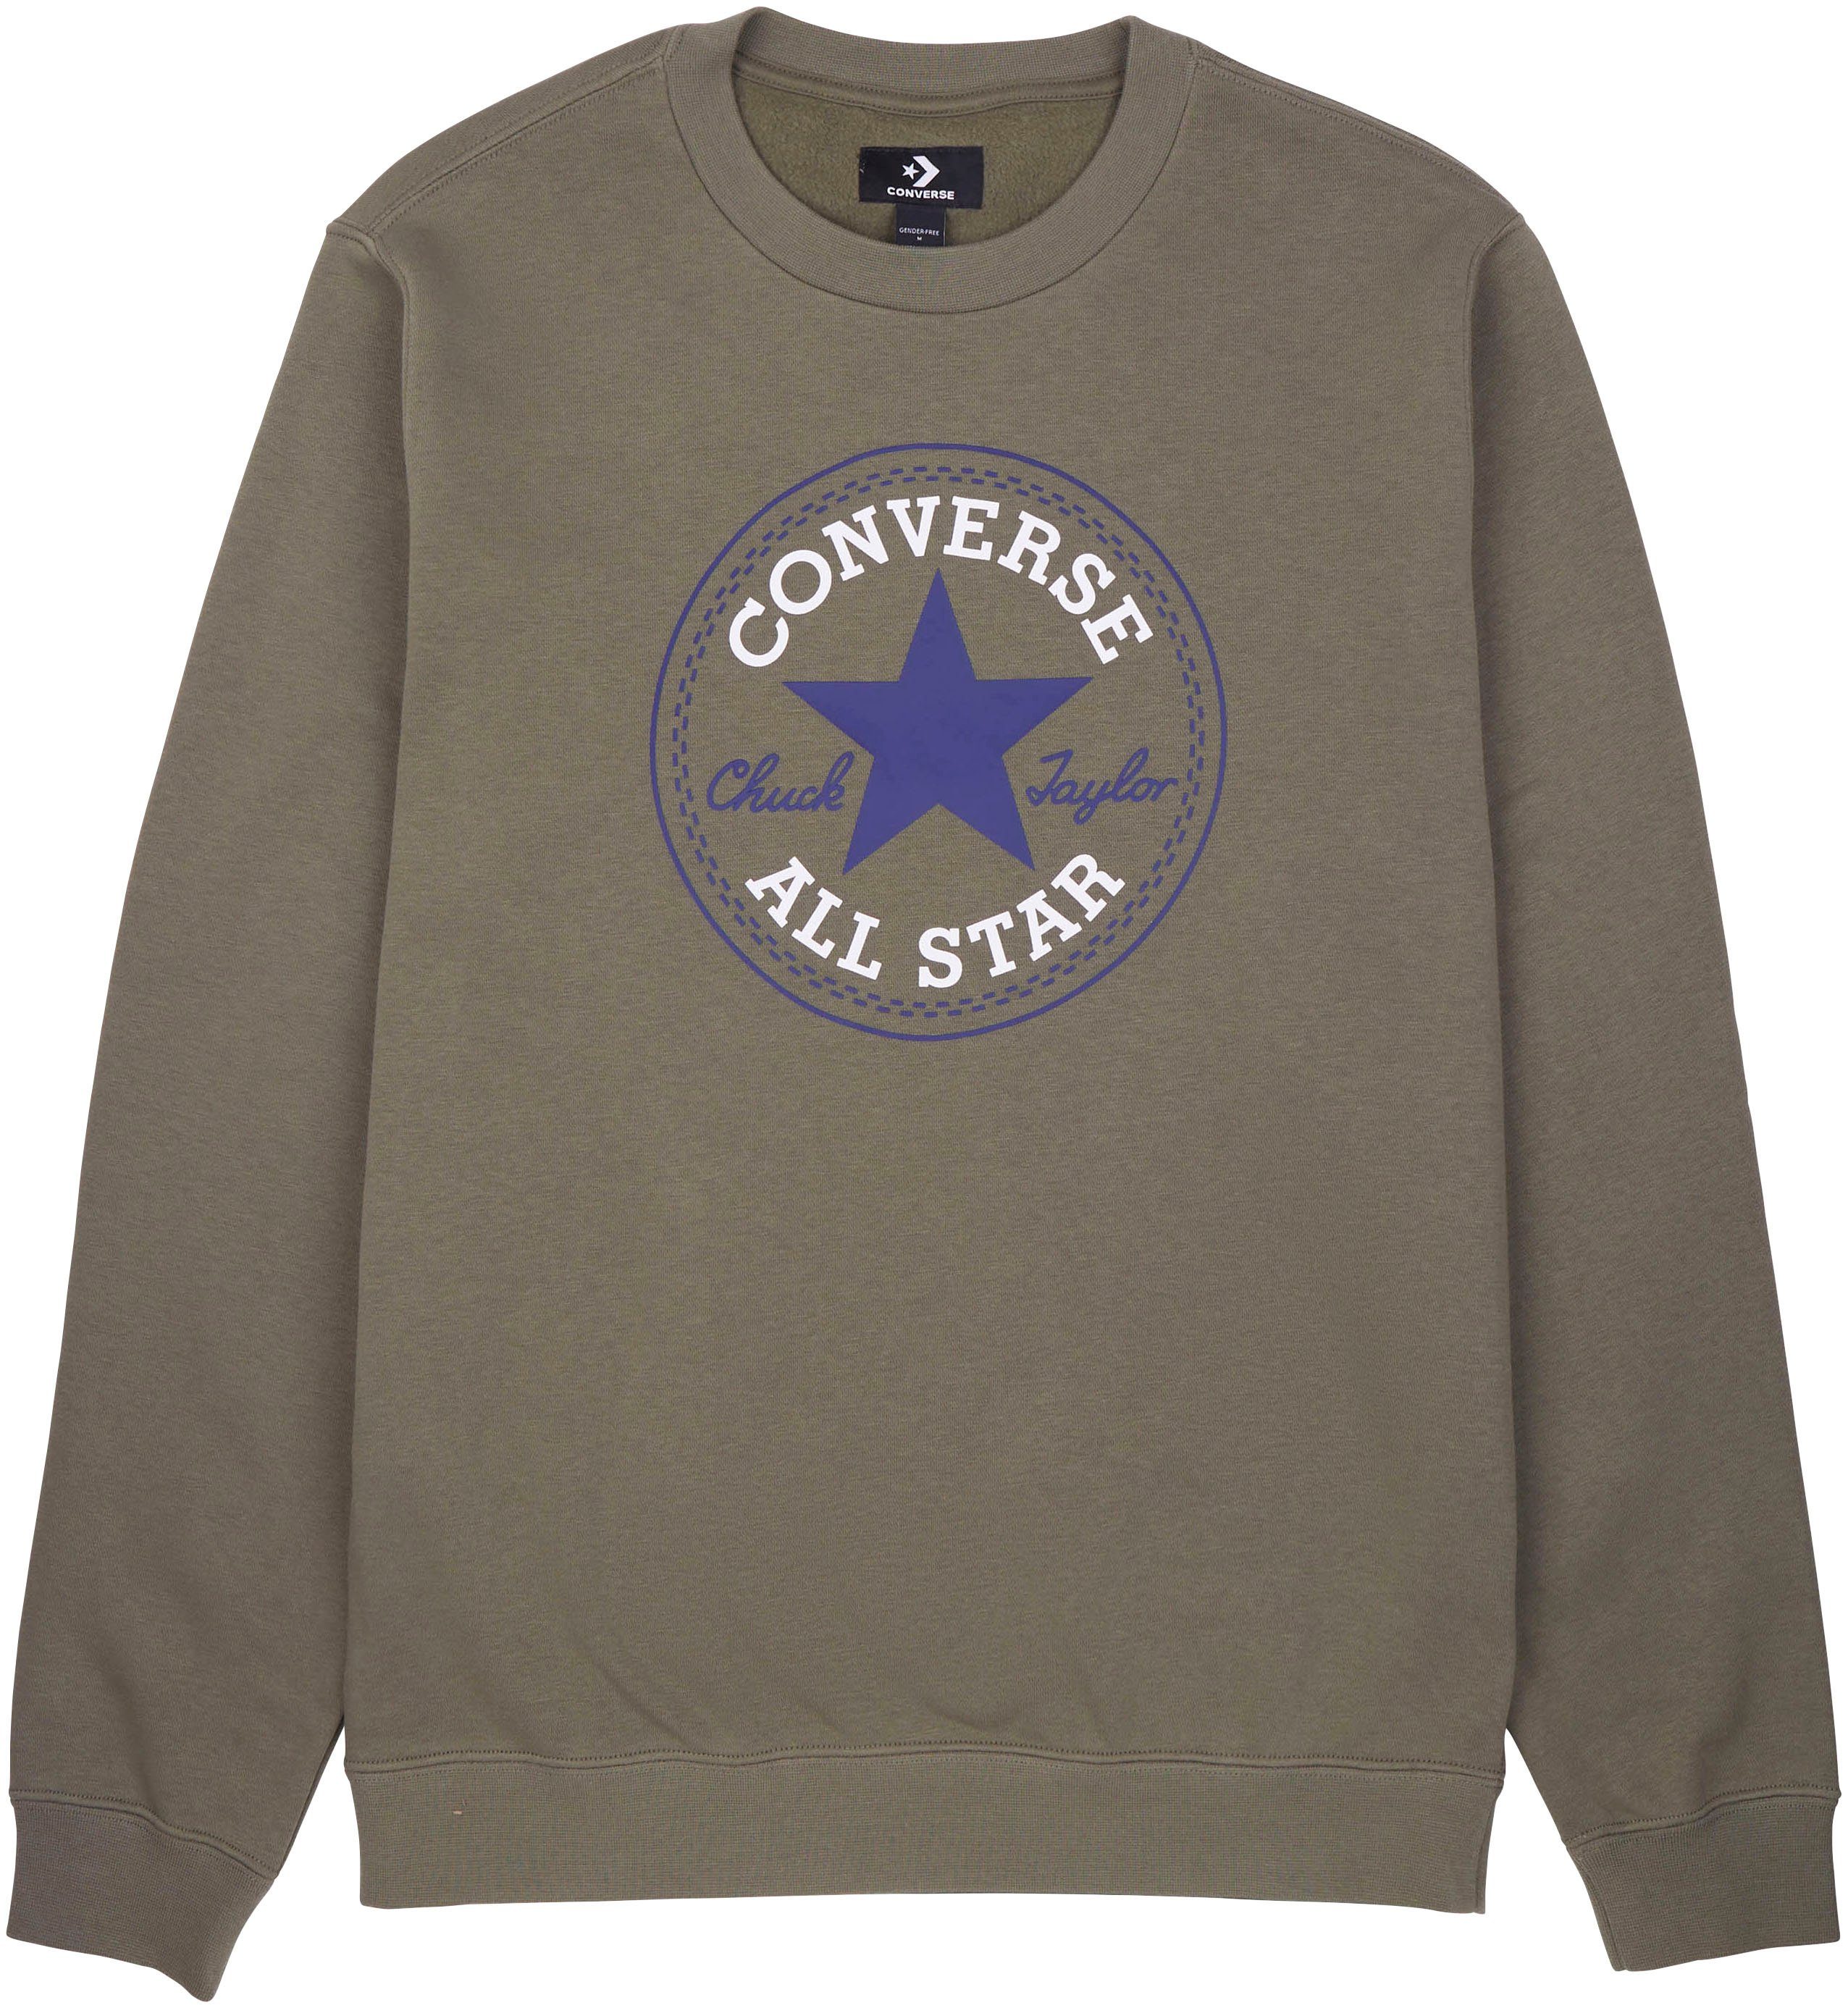 Converse Sweatshirt UNISEX ALL STAR BACK olive BRUSHED PATCH